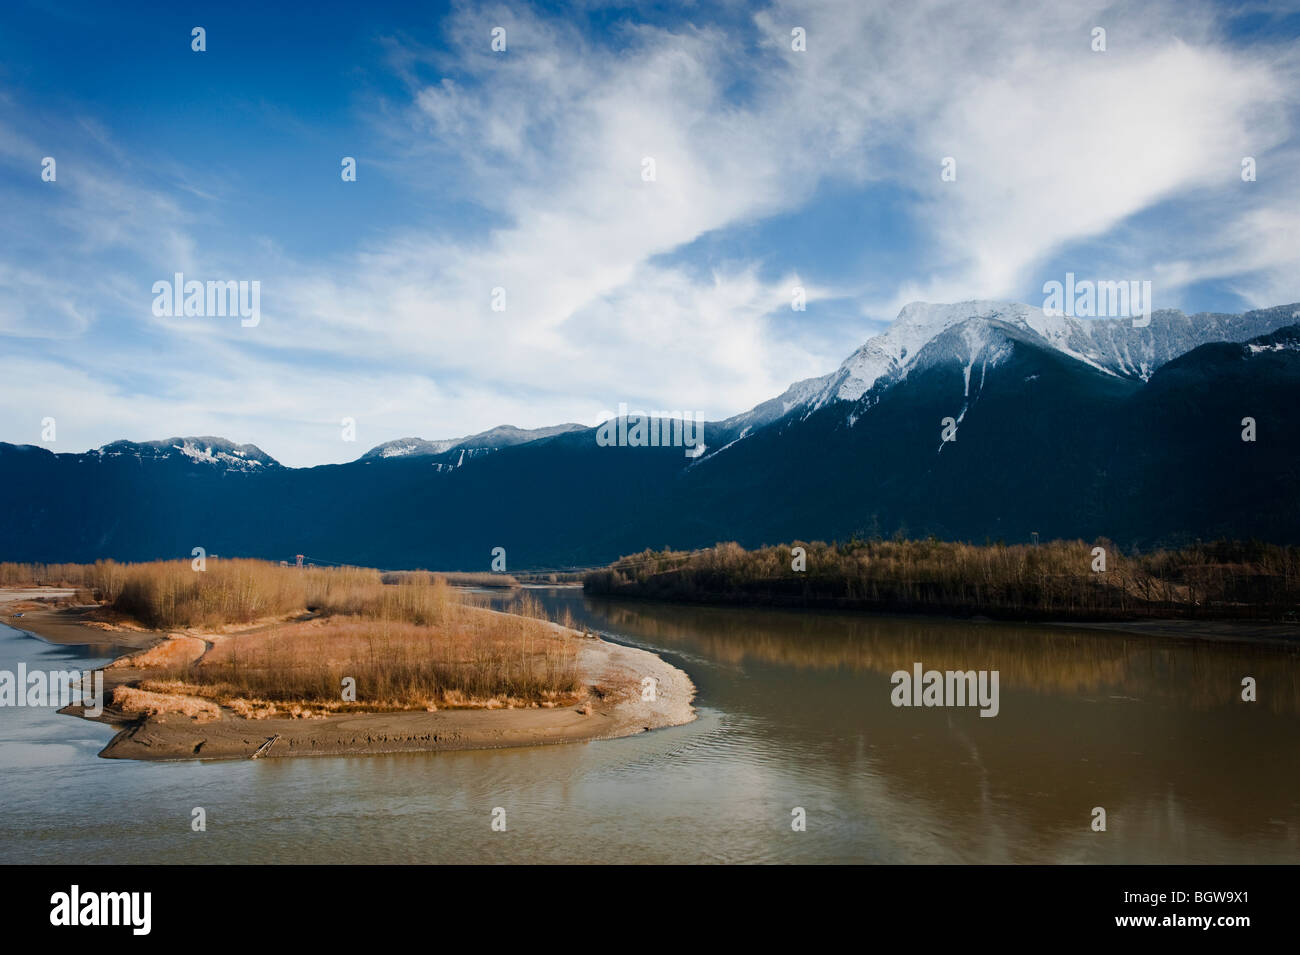 The Fraser River in the lower mainland area of British Columbia is the longest river in BC and the 7th longest in Canada. Stock Photo